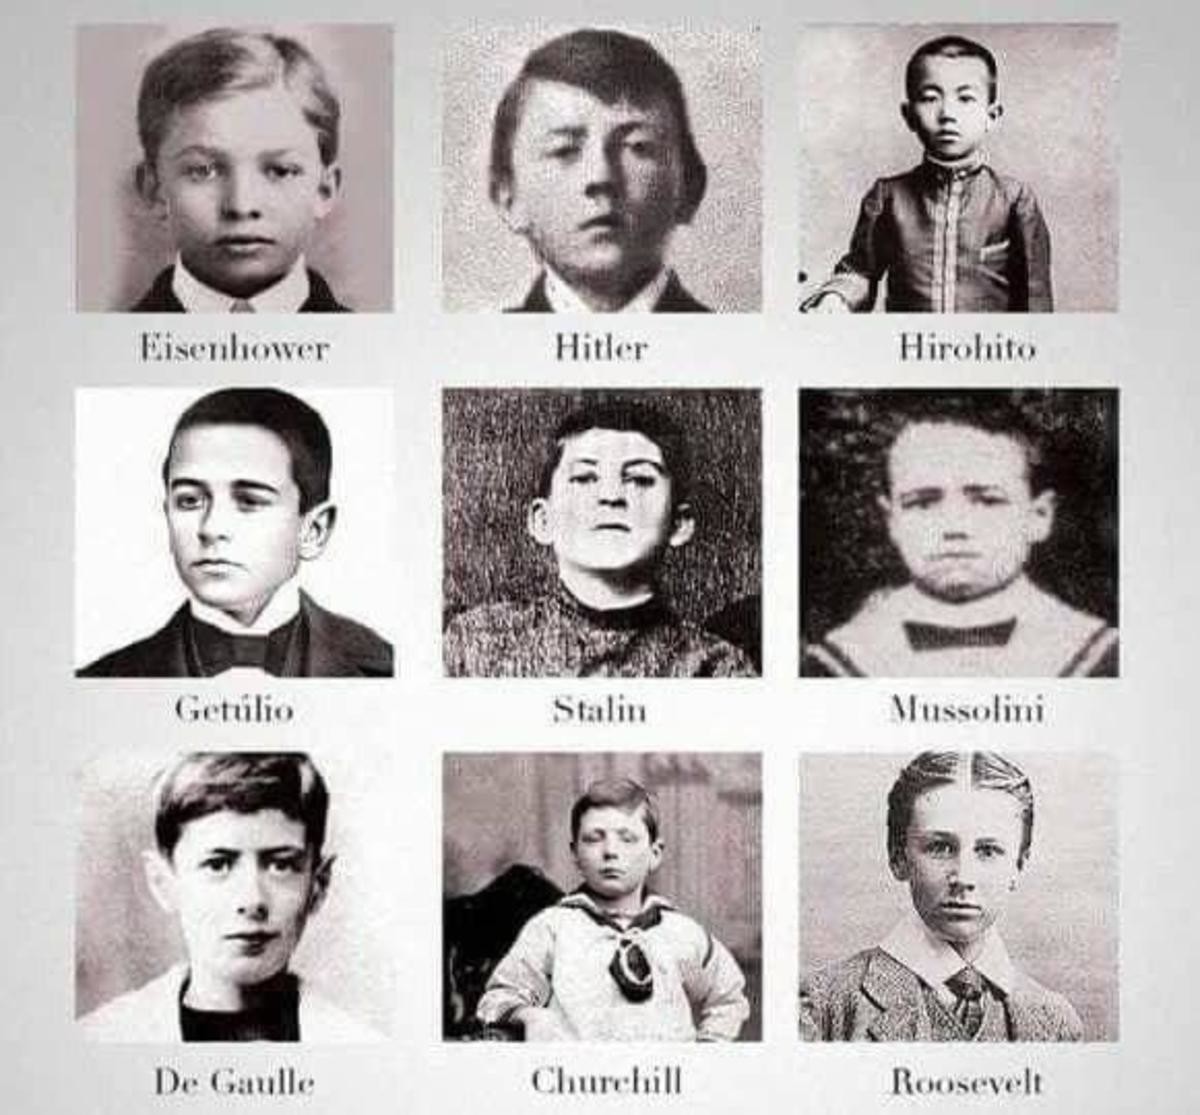 prolific Partridge. .. Even as a child Stalin looked like a prick that's quite an accomplishment to carry that energy his entire life.